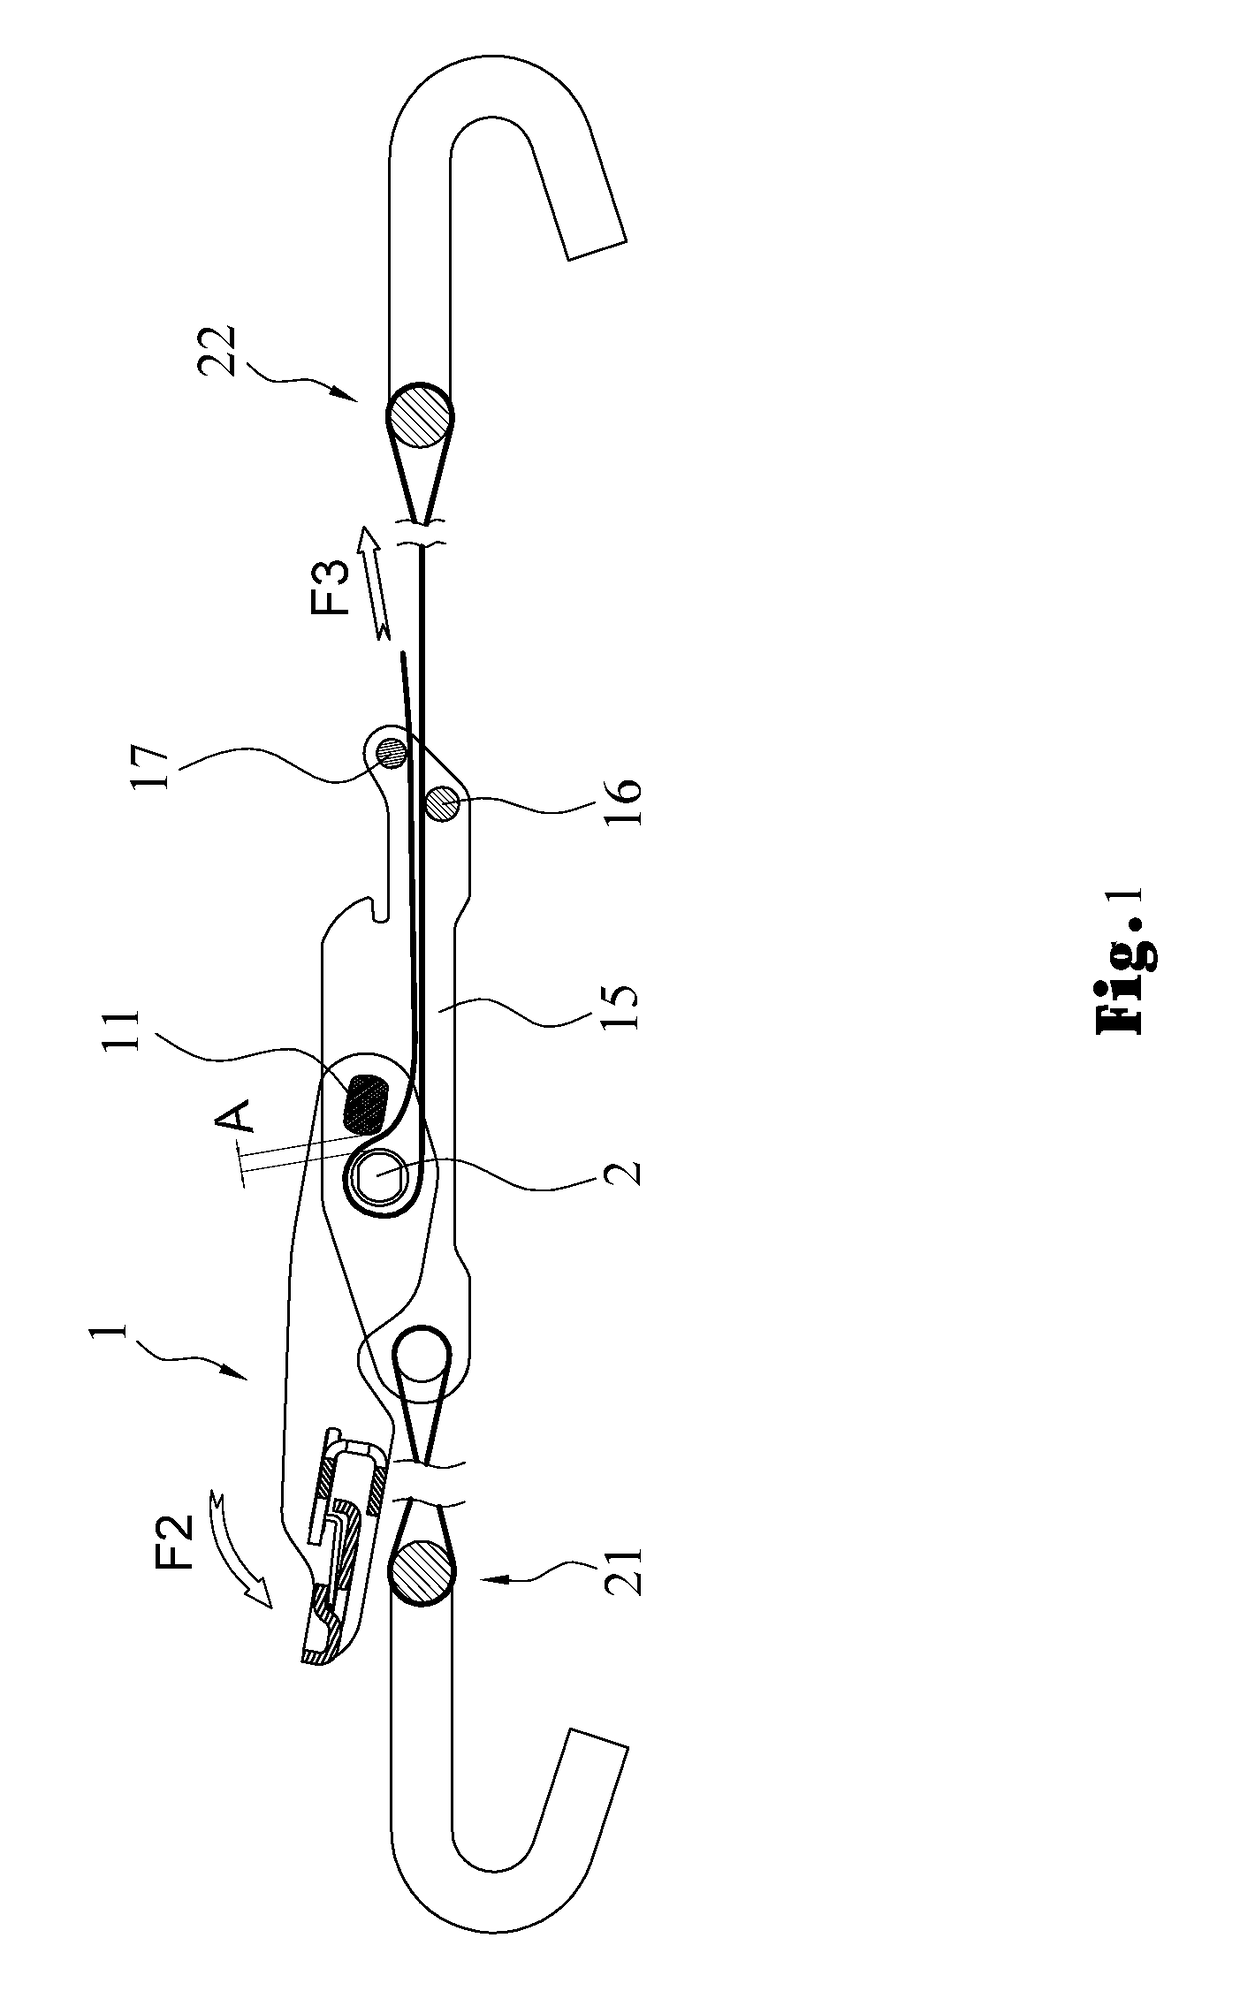 Anti-slip safety tensioning device for automobile